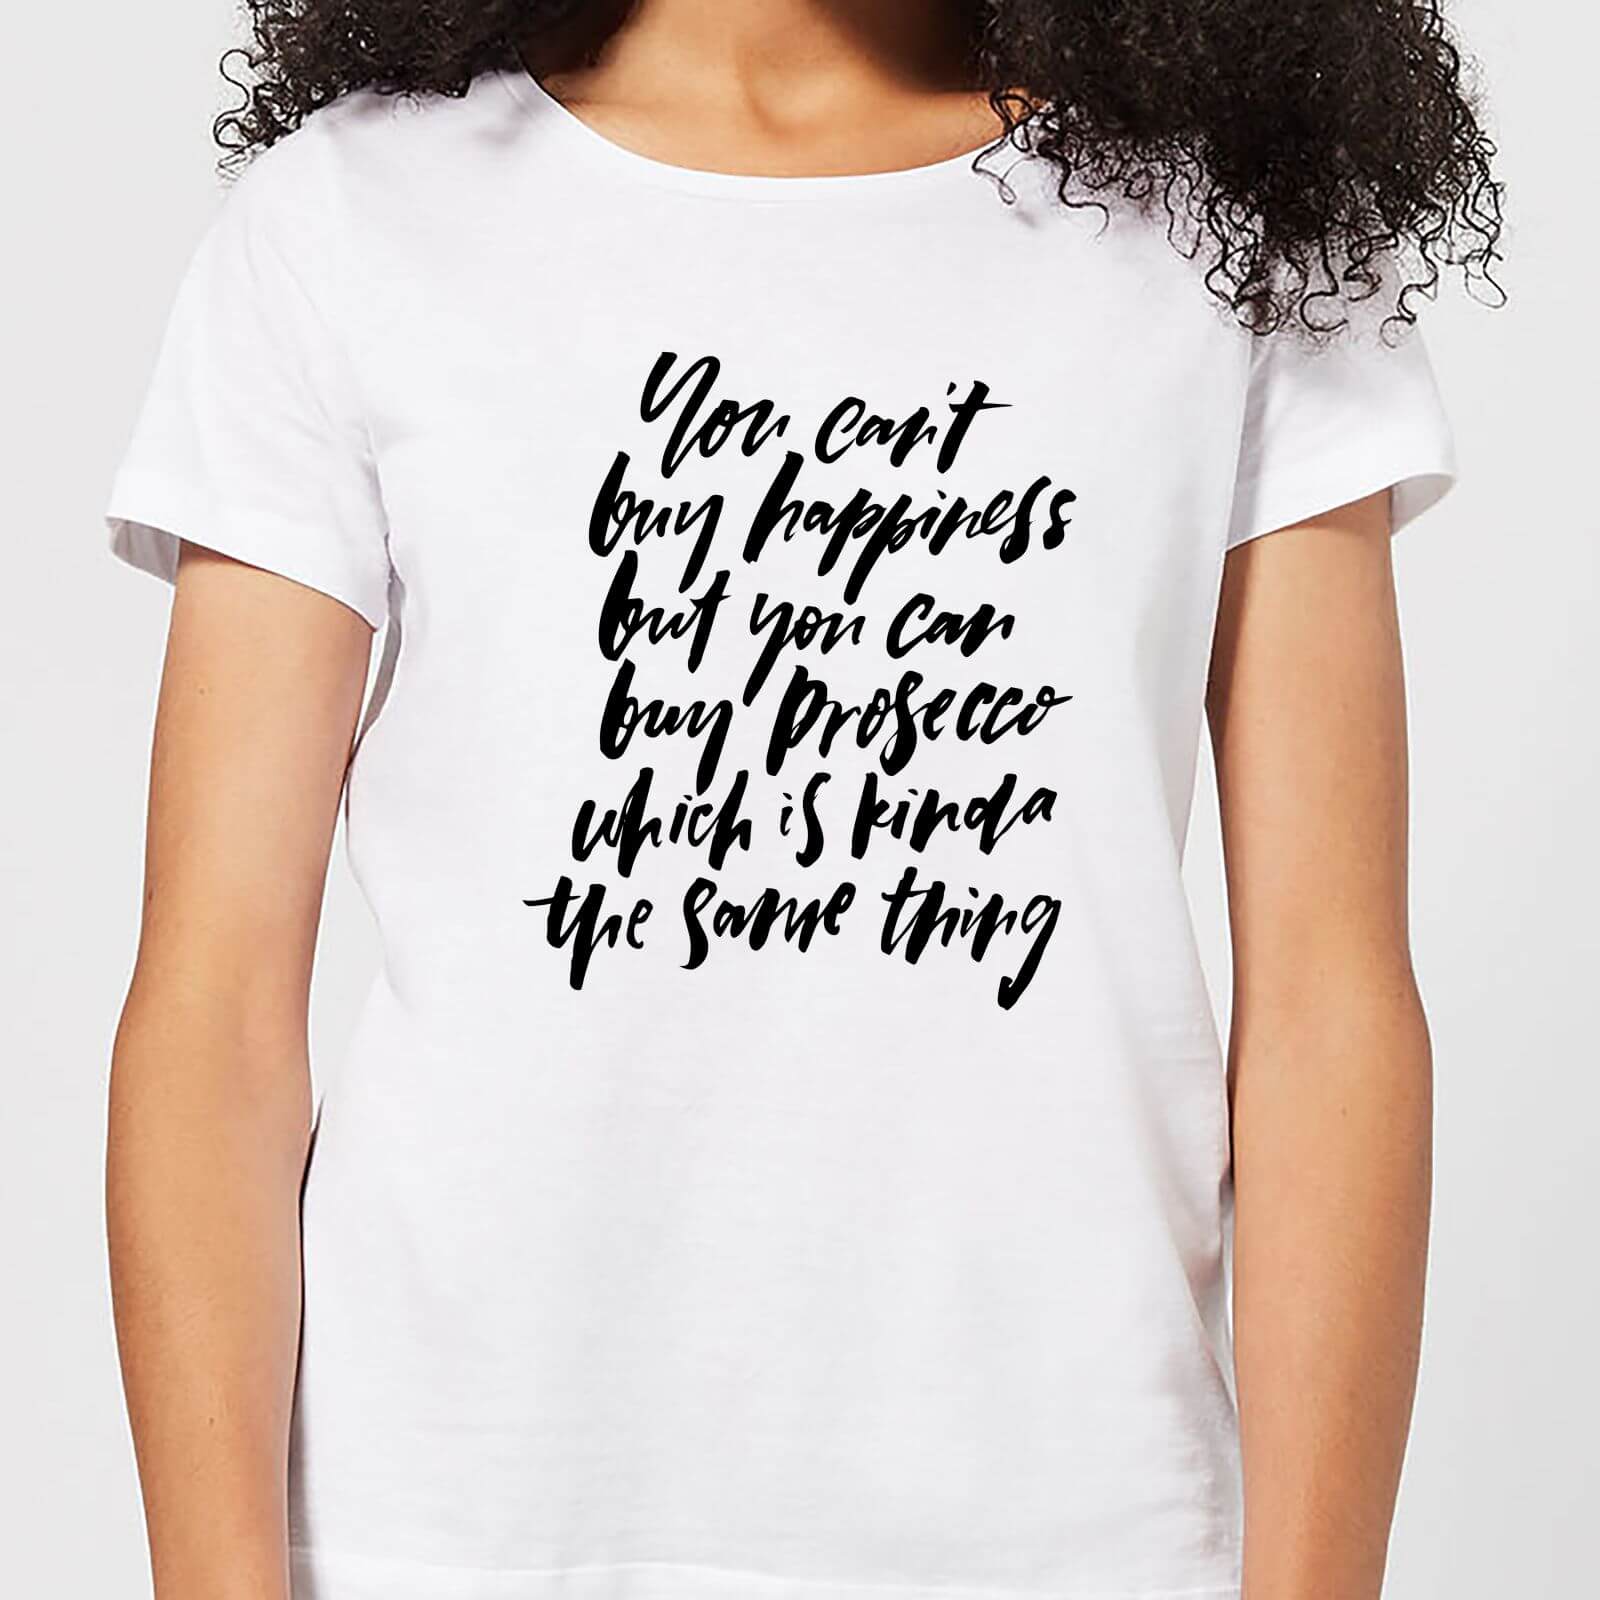 You Can't Buy Happiness Women's T-Shirt - White - S - White